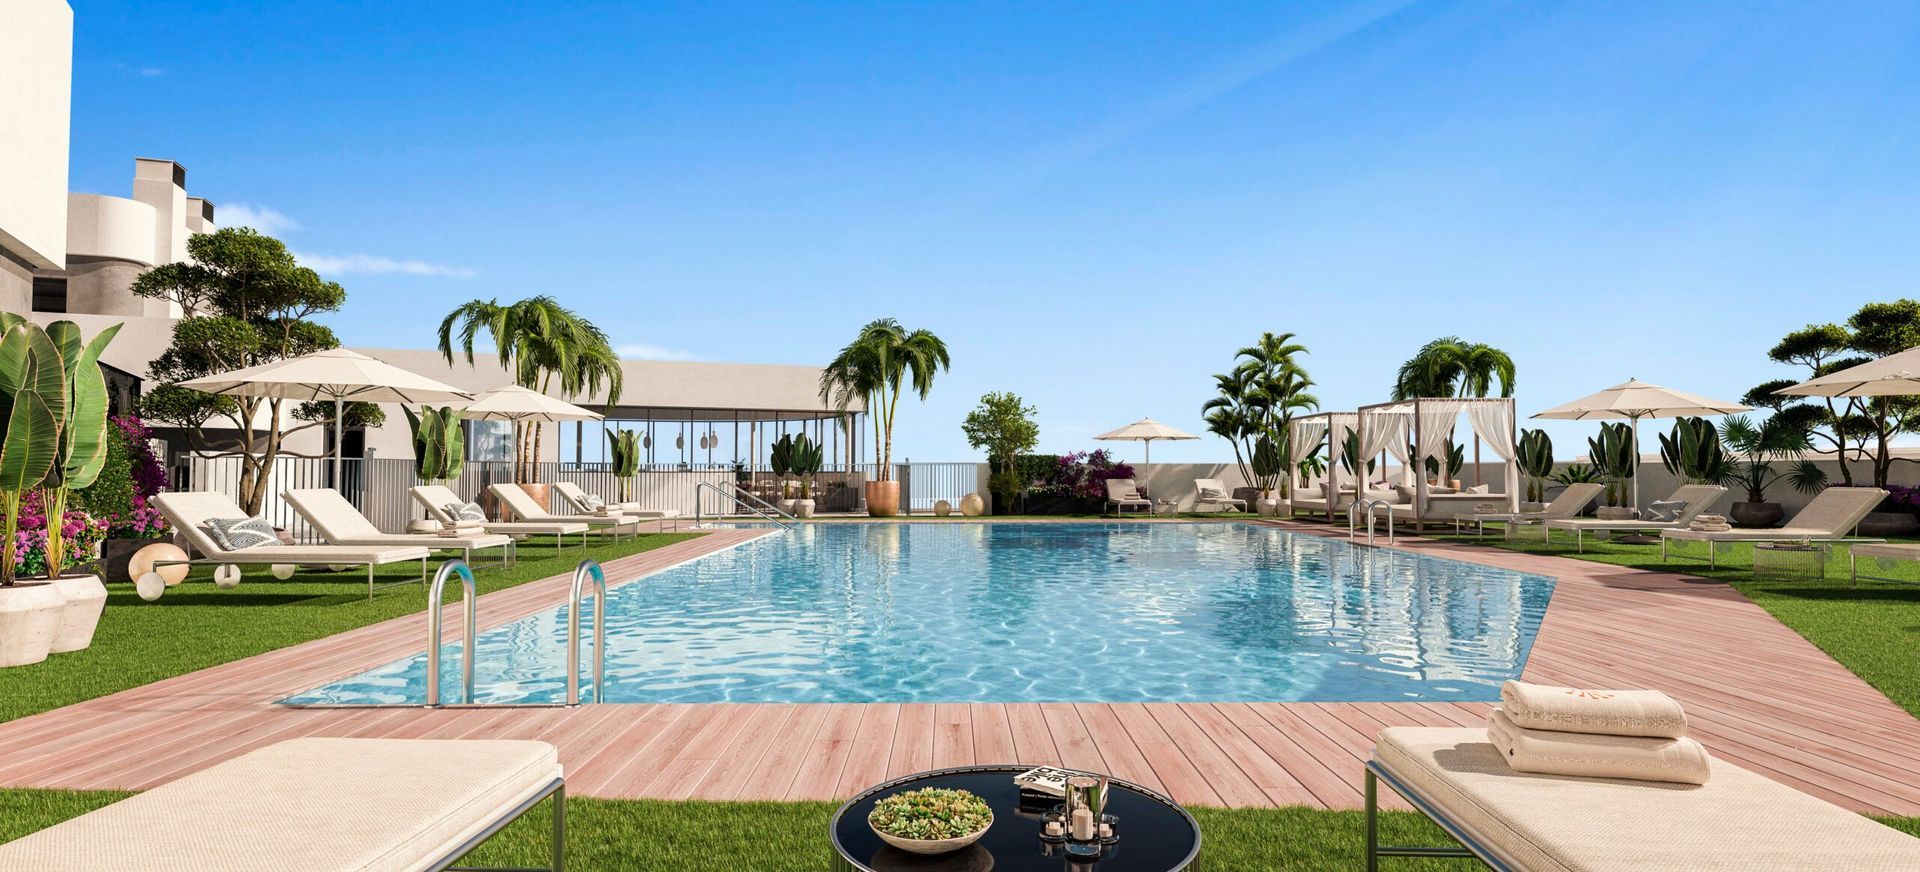 The newest off plan project in Marbella, Marbella